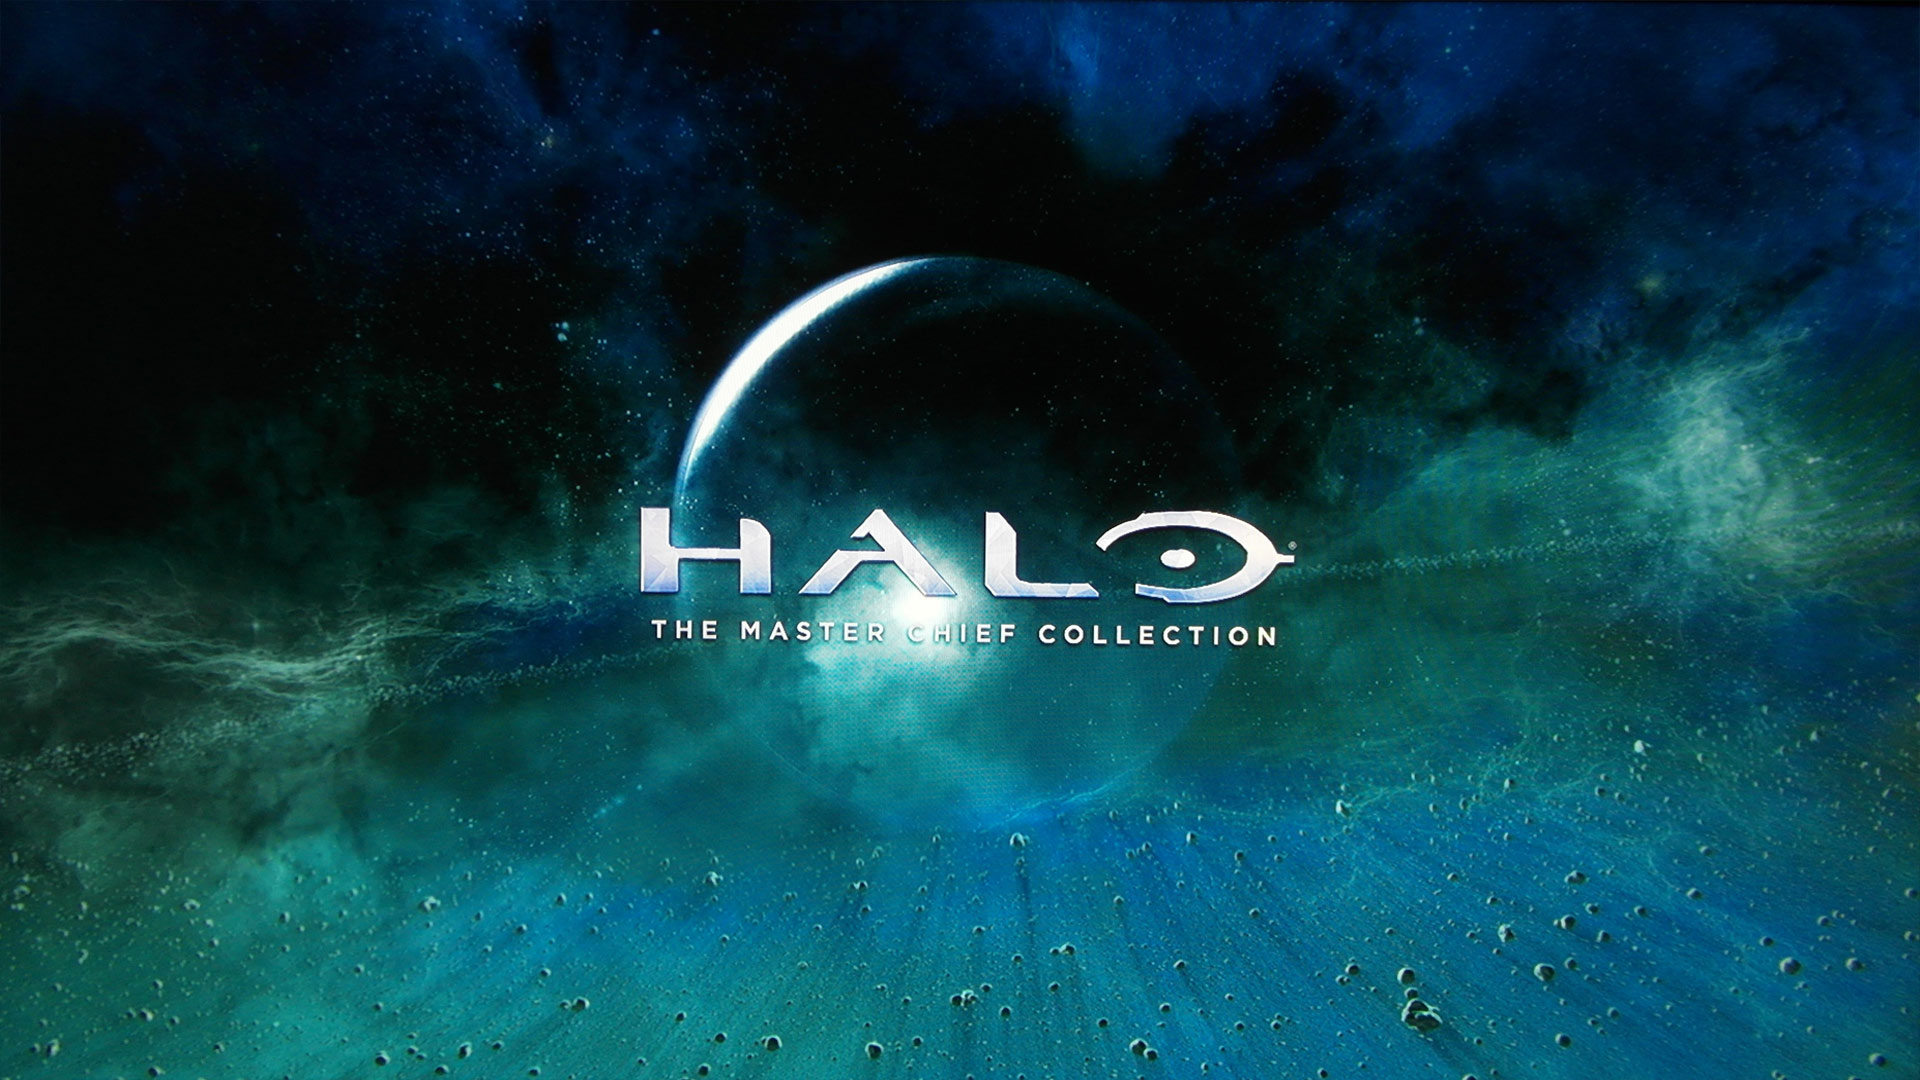 Halo: The Master Chief Collection Wallpaper